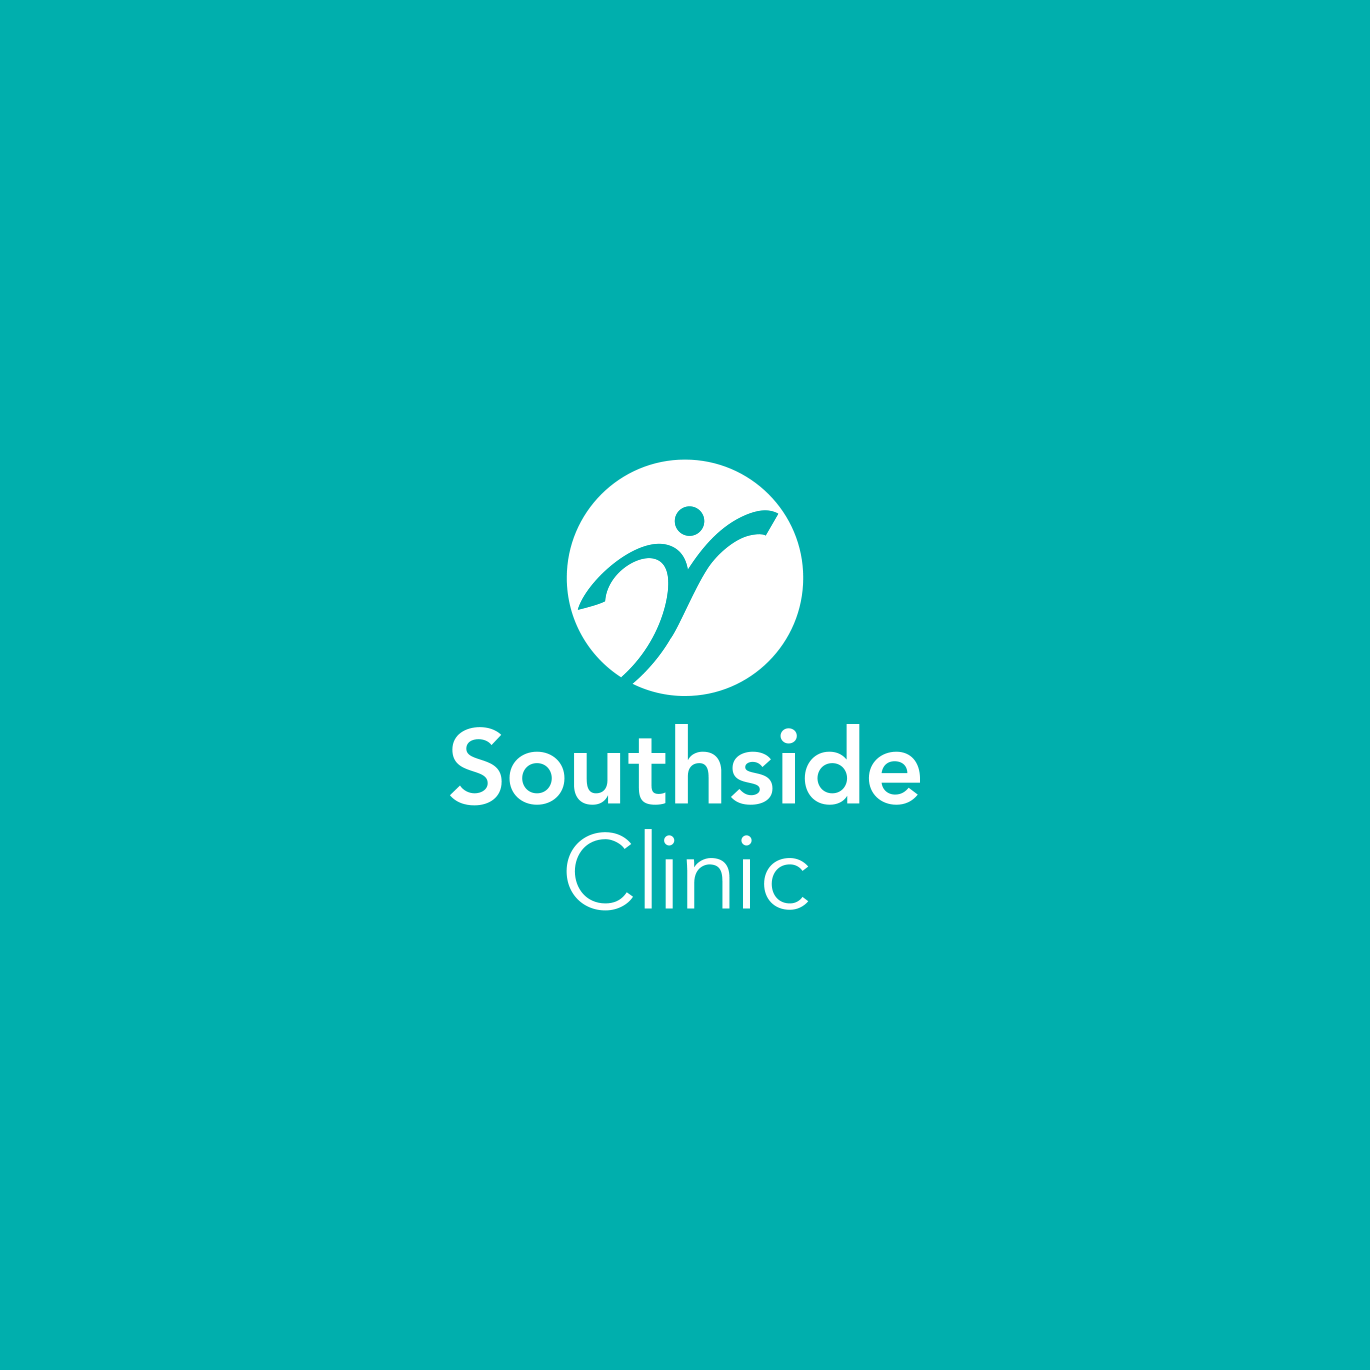 Southside Clinic